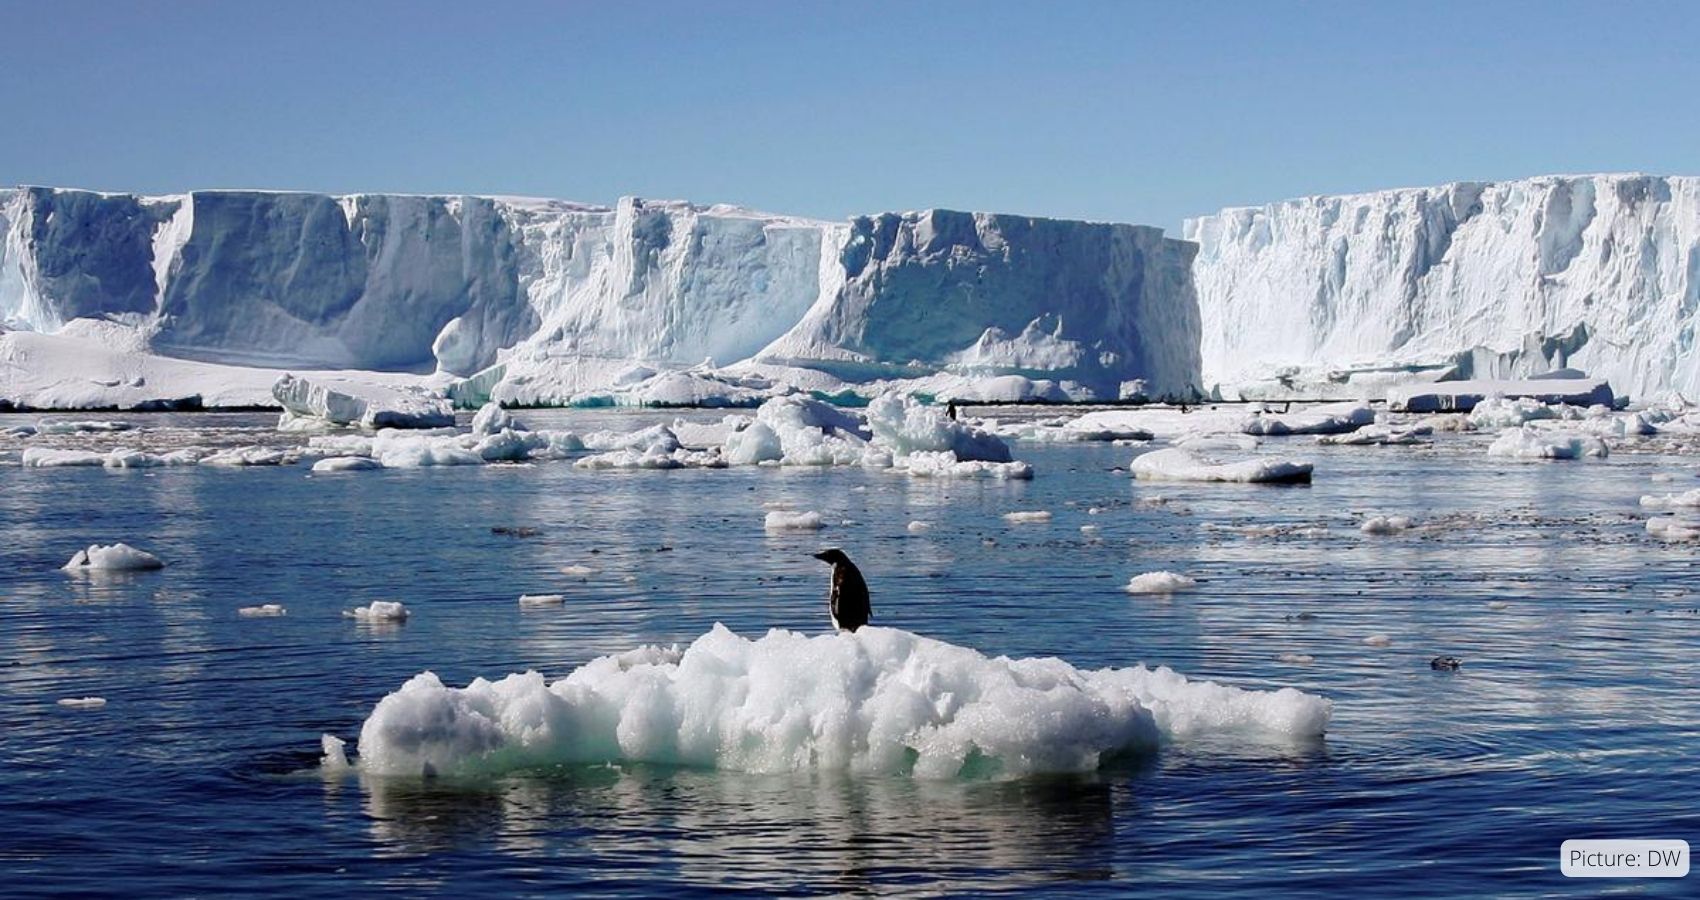 Antarctic Ice Shelf Melting to Accelerate, Raising Concerns for Rising Sea Levels